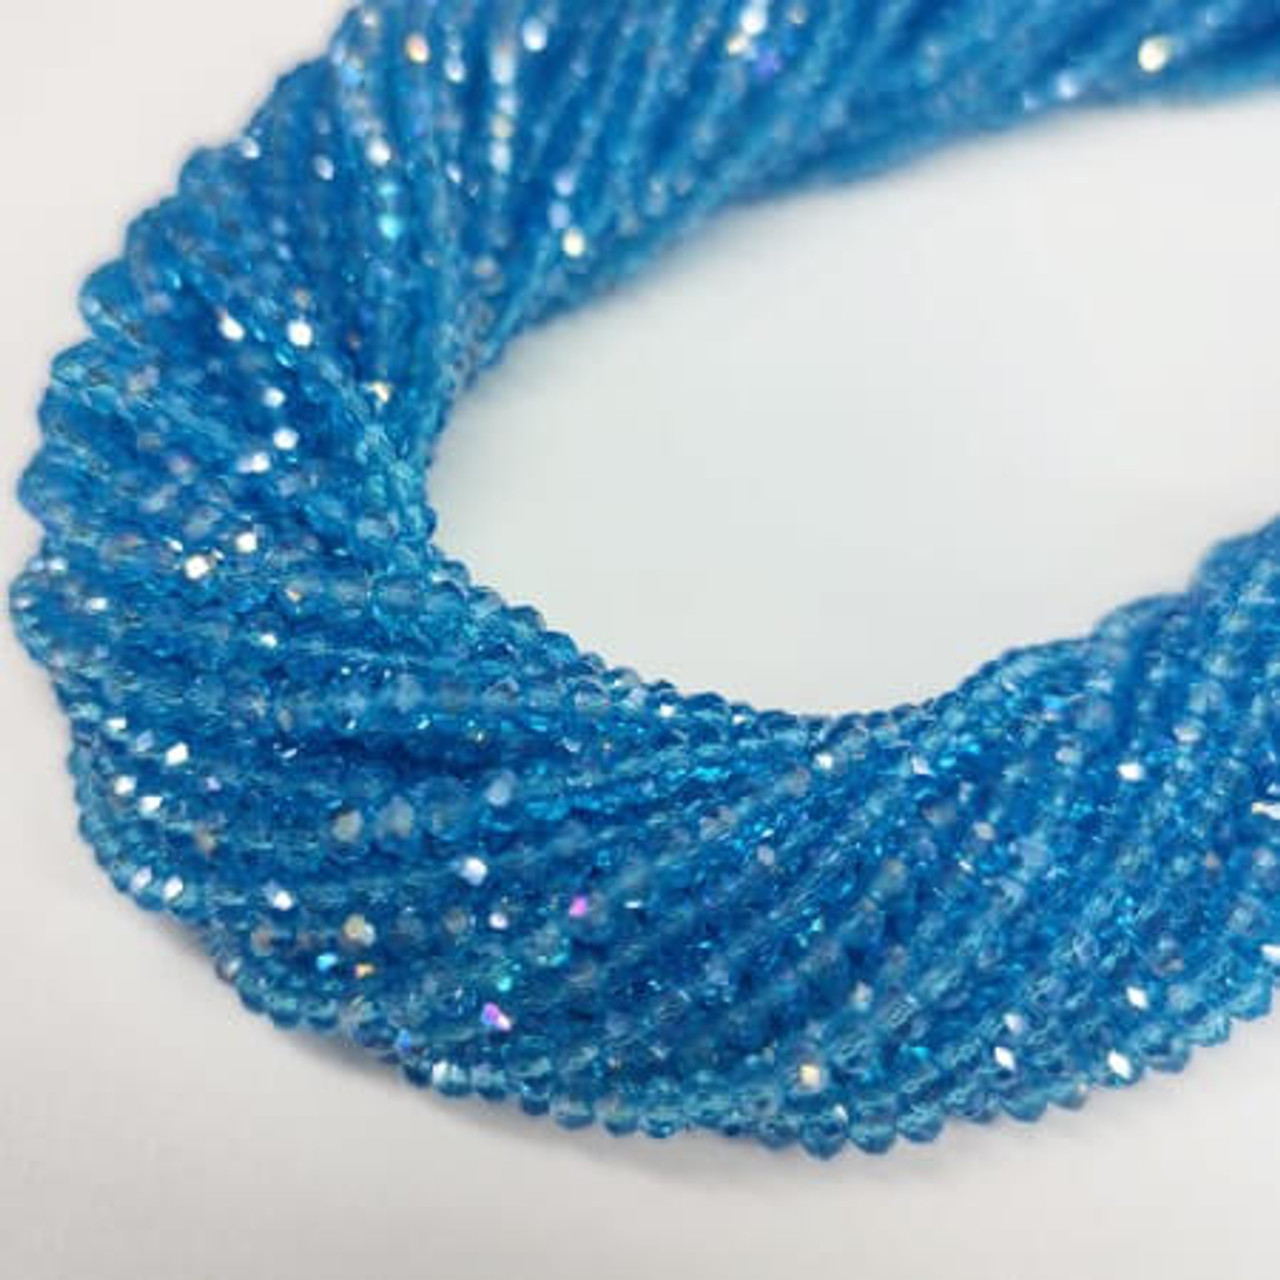 Chinese Crystal Rondelle Beads 3x2mm AIR BLUE OPAL AB